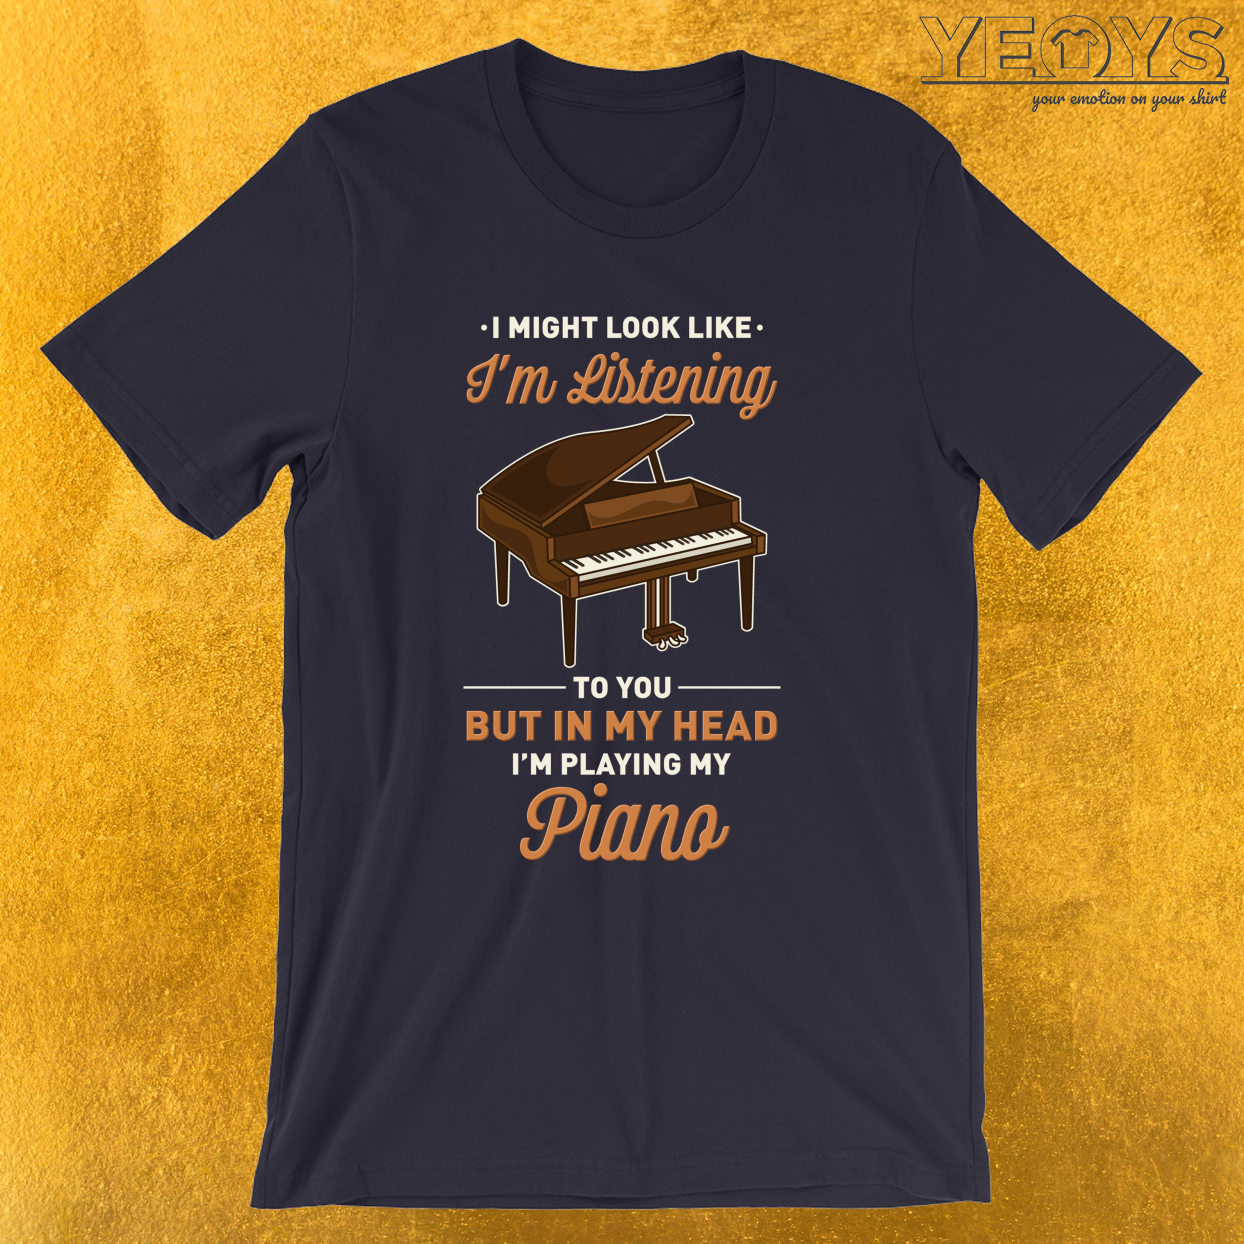 In My Head I’m Playing My Piano – Funny Piano Quotes Tee